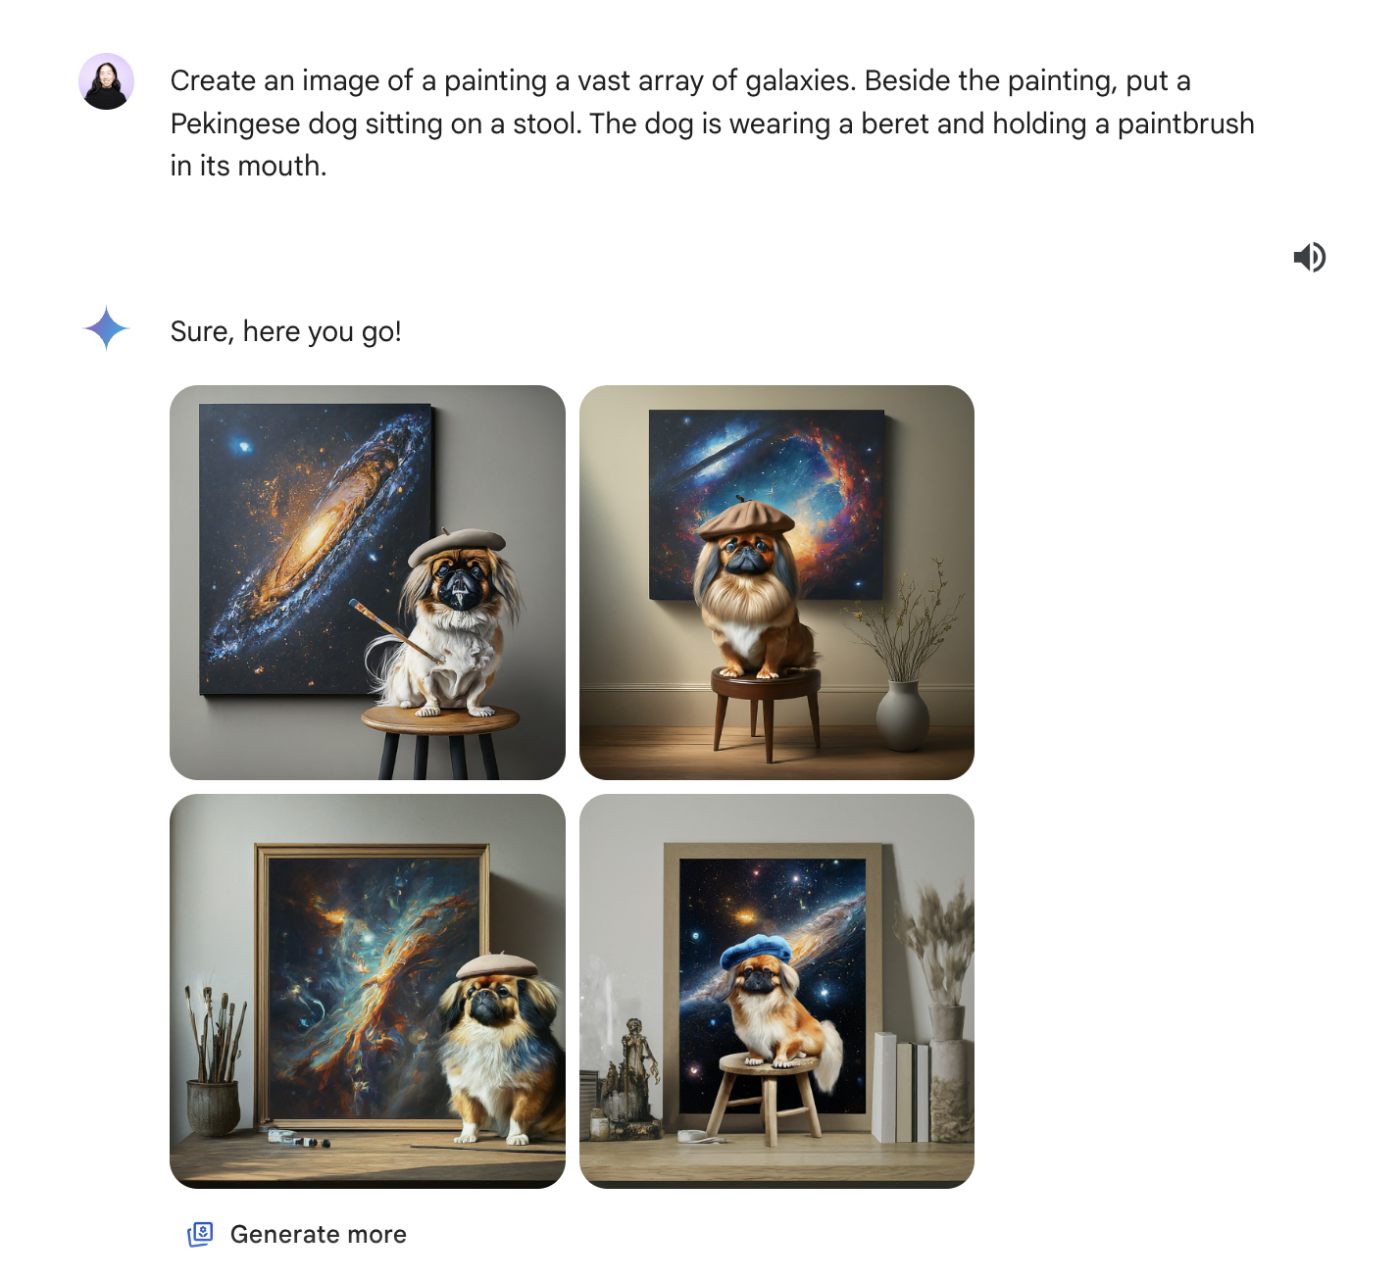 Gemini conversation with four AI-generated images of a Pekingese dog wearing a beret, sitting on a stool beside a painting of galaxies.